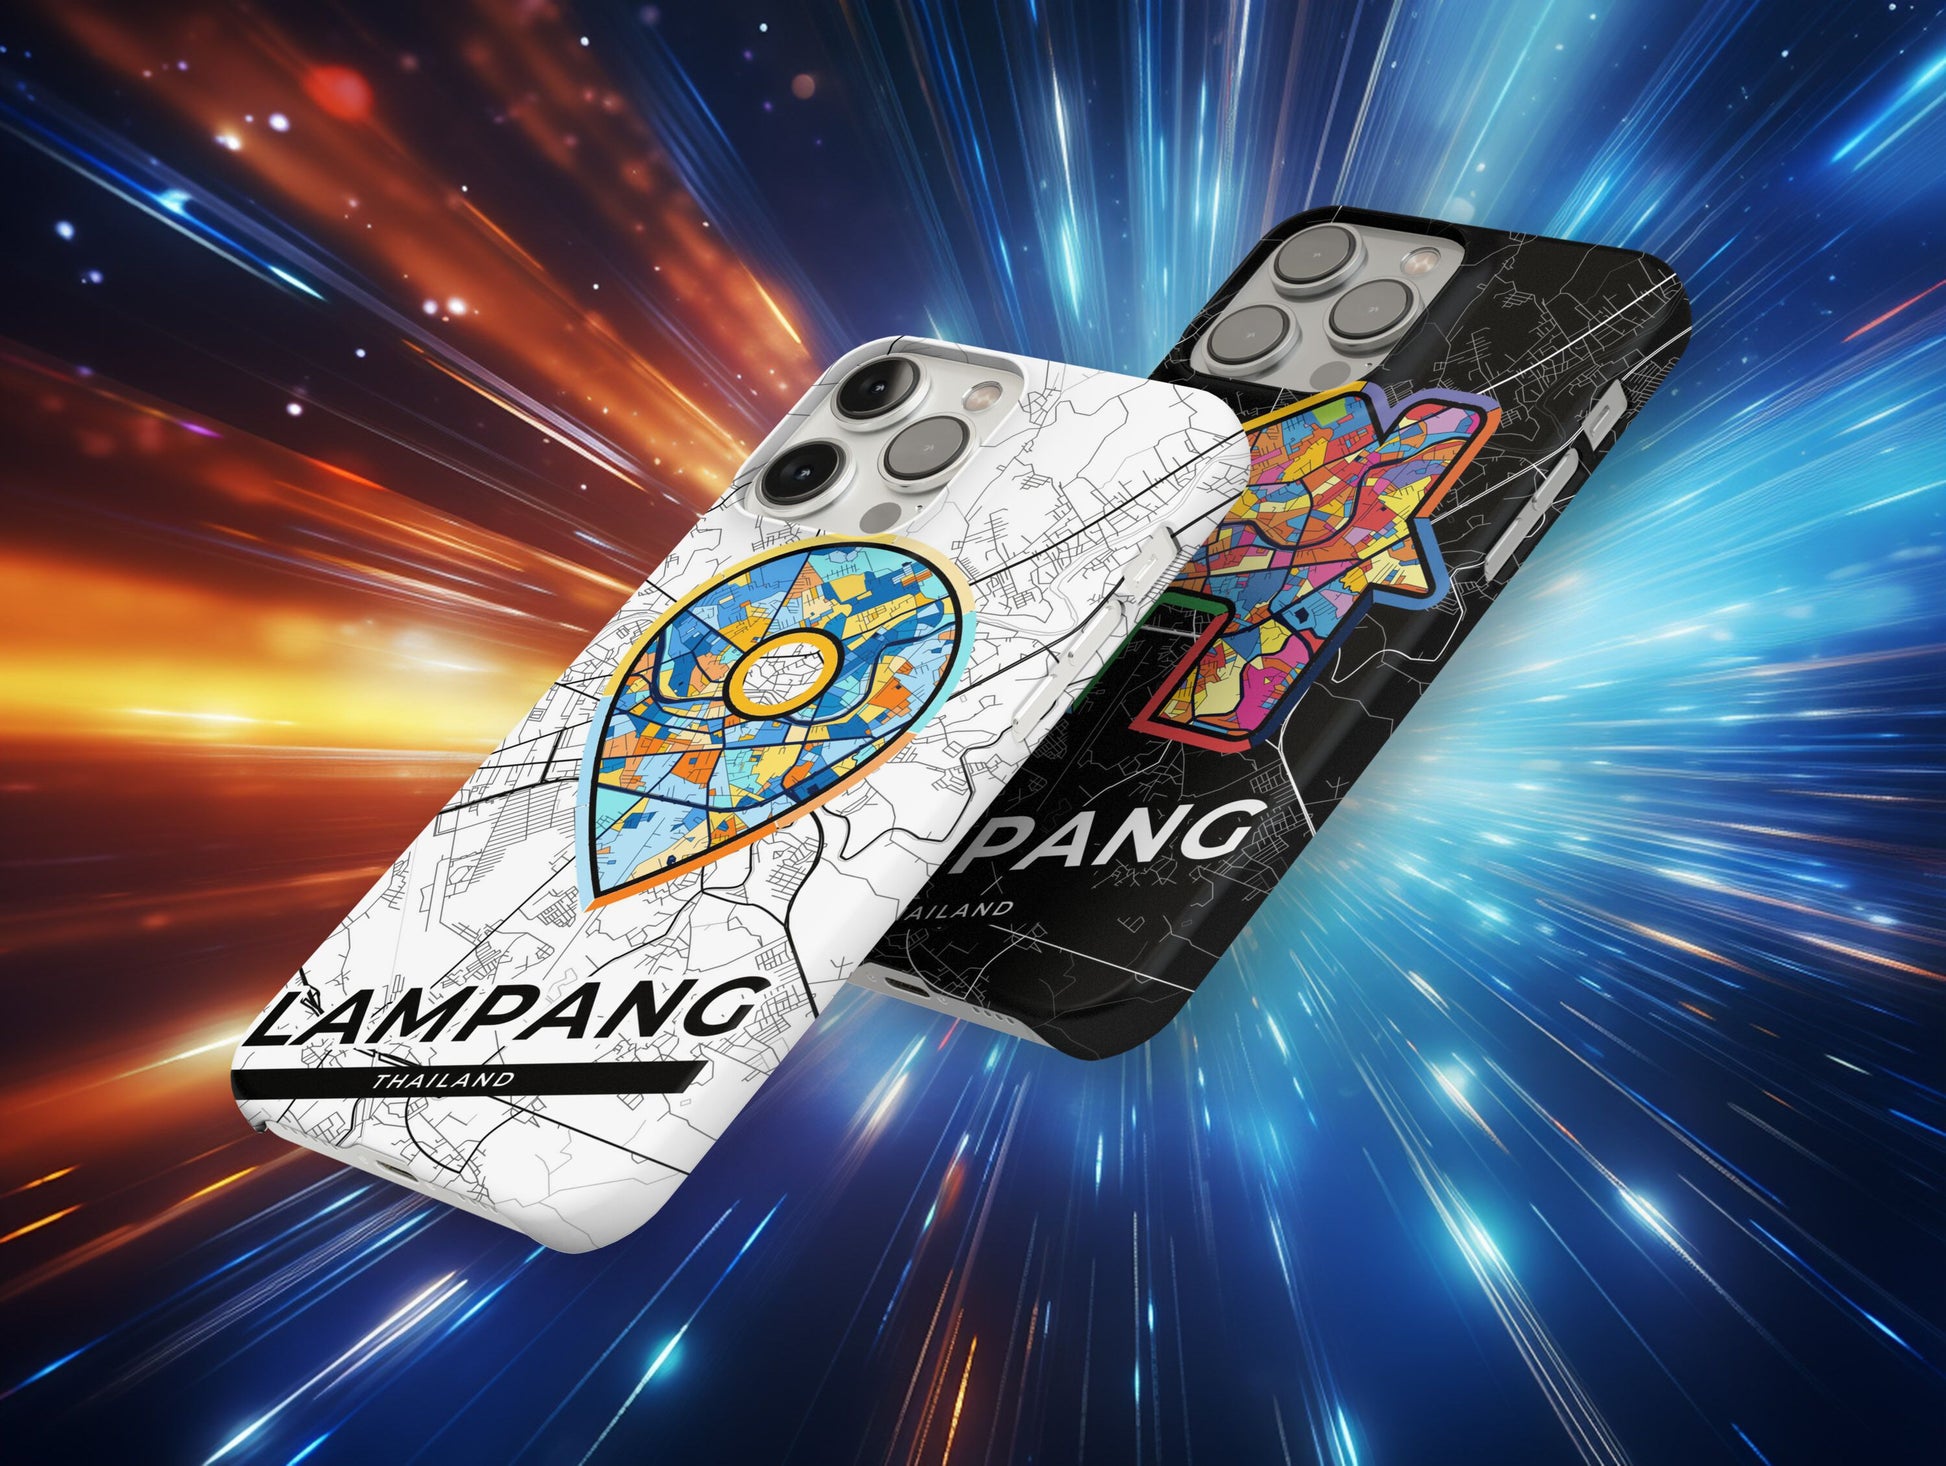 Lampang Thailand slim phone case with colorful icon. Birthday, wedding or housewarming gift. Couple match cases.